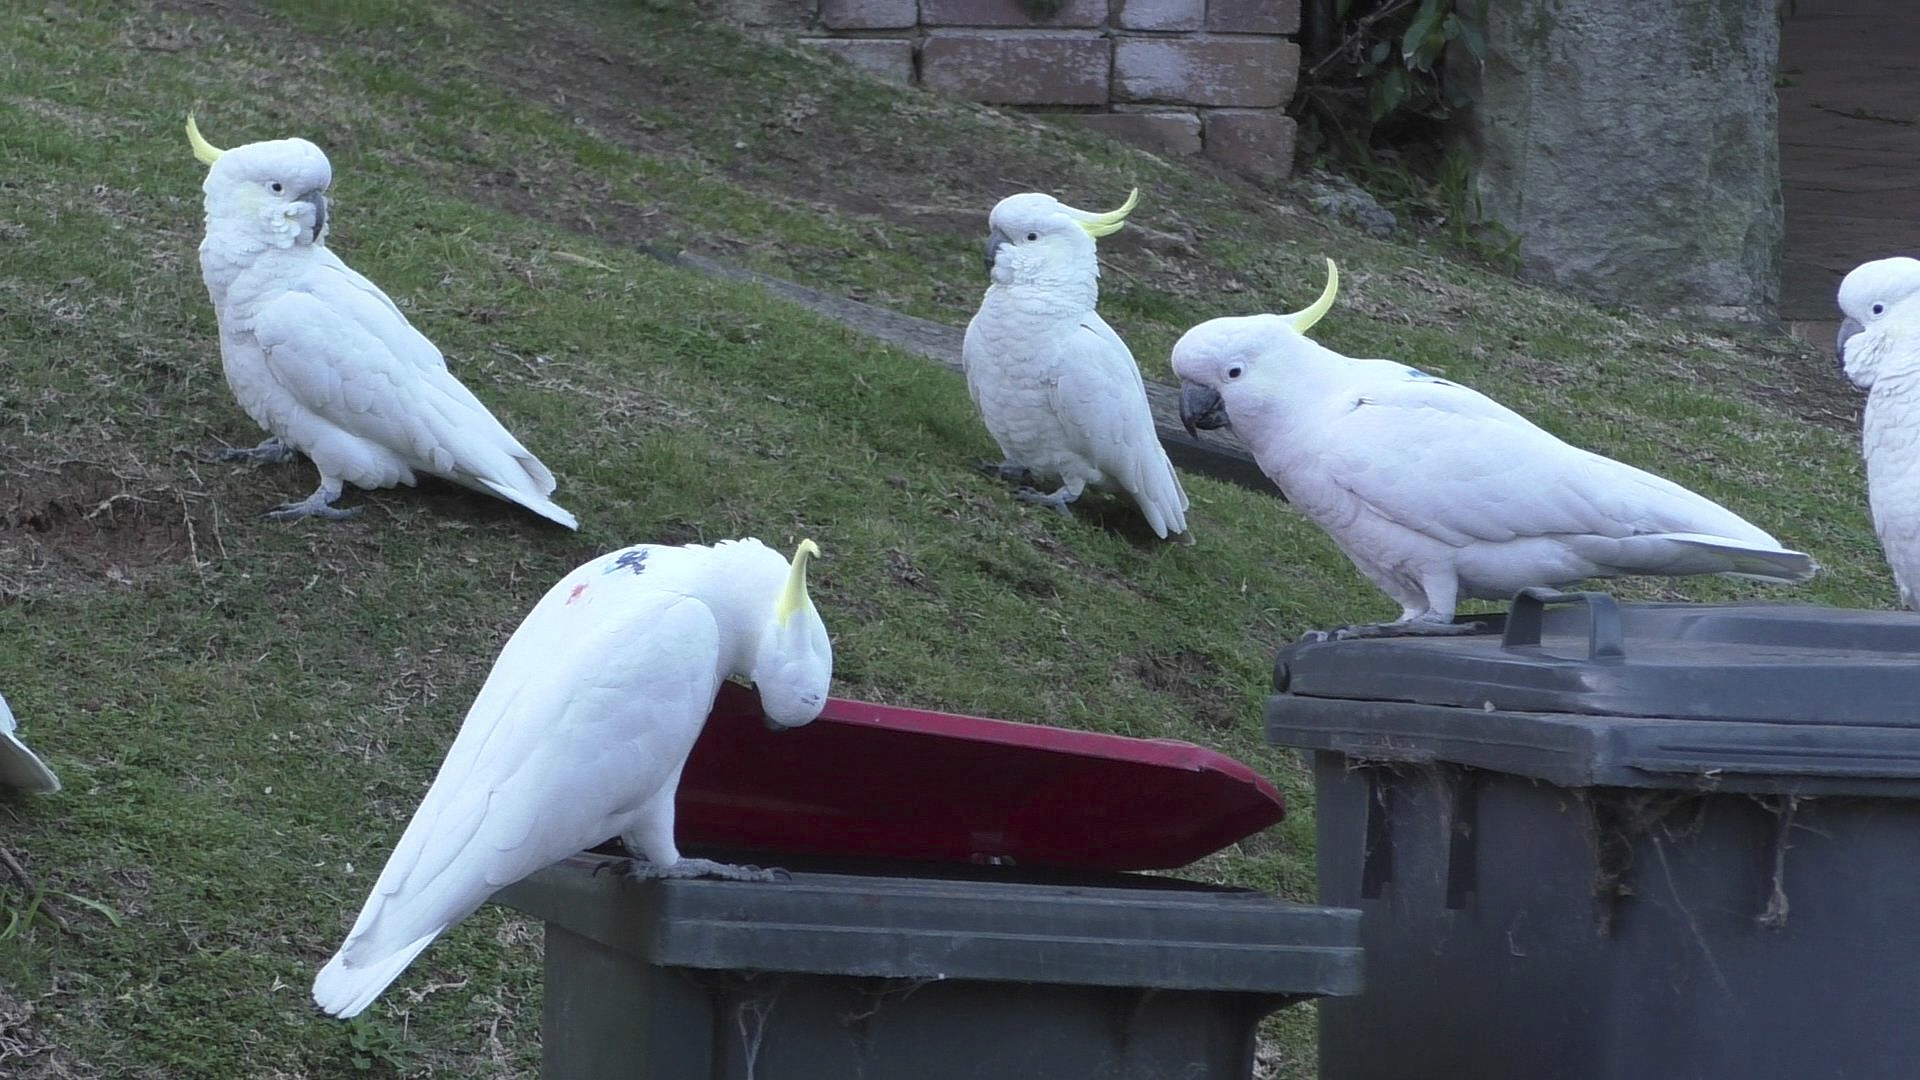 In this 2019 photo provided by researcher Barbara Klump, a sulphur-crested cockatoo lifts the lid of a trash can while several others watch in Sydney, Australia. At the beginning of 2018, researchers received reports from a survey of residents that birds in three Sydney suburbs had mastered the novel foraging technique. By the end of 2019, birds were lifting bins in 44 suburbs. (Barbara Klump/Max Planck Institute of Animal Behavior)